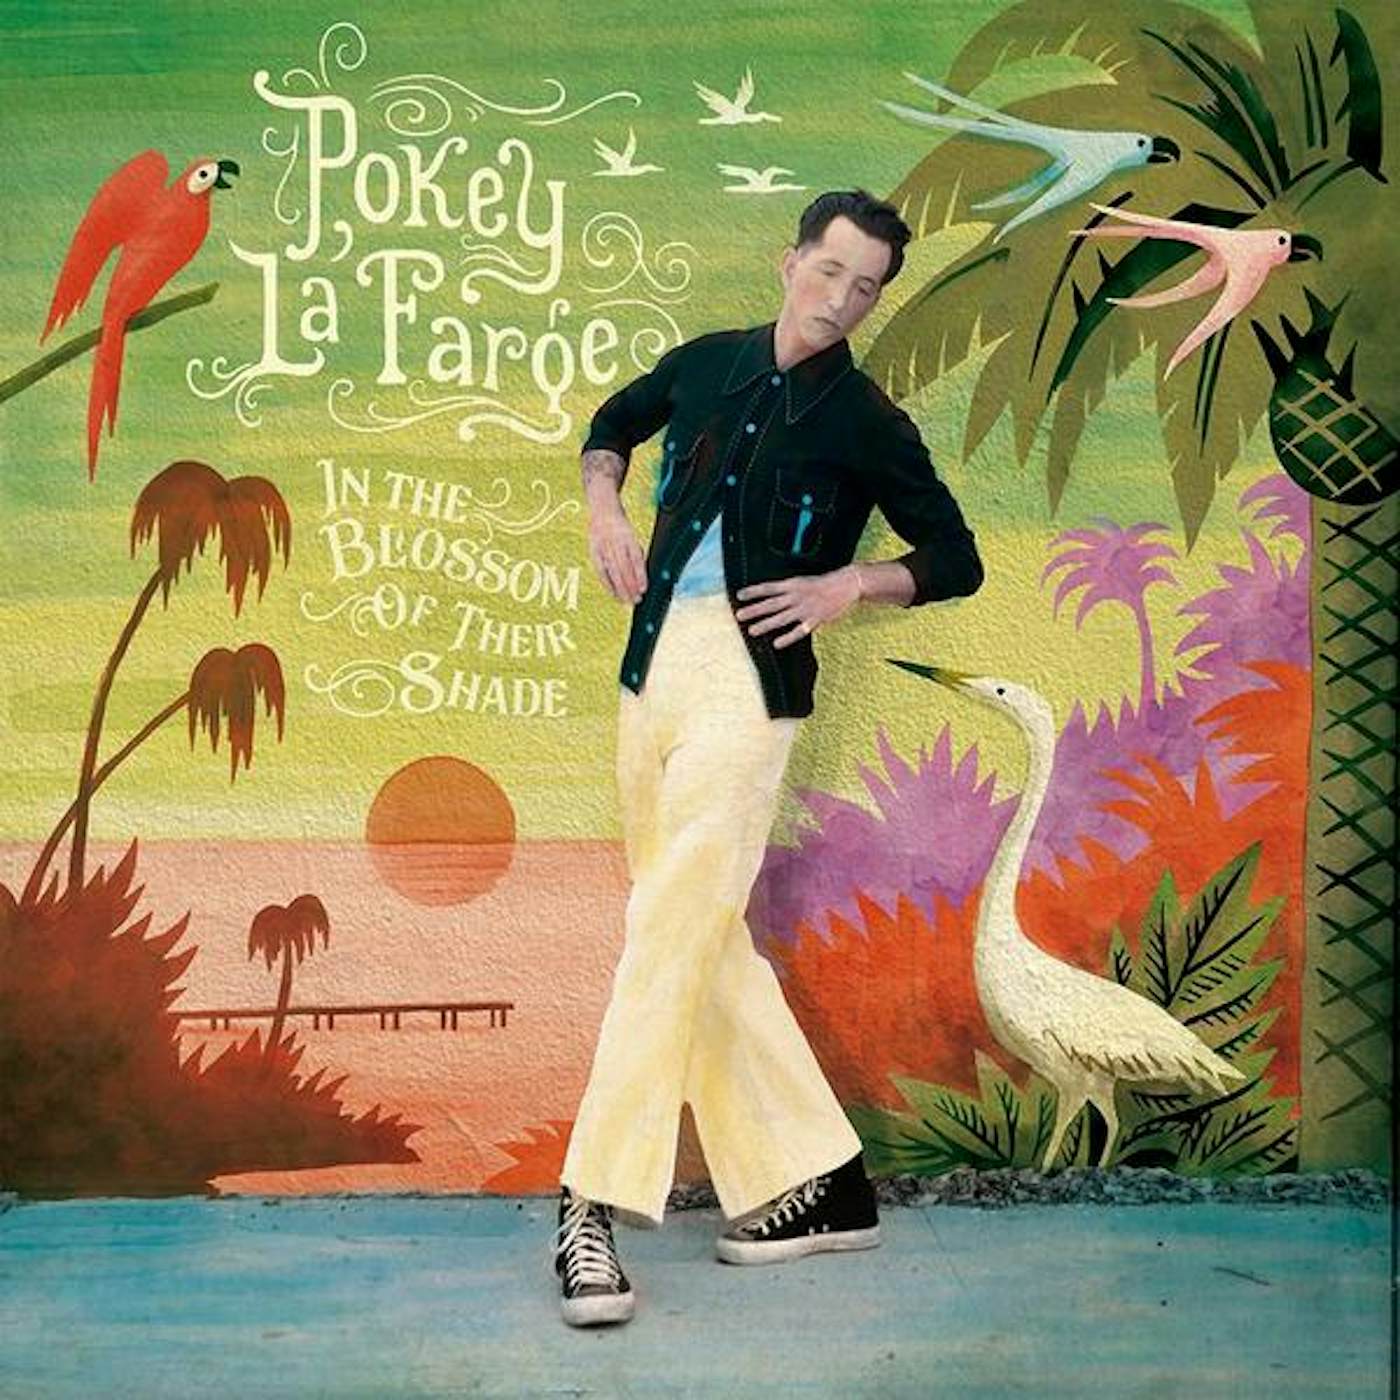 Pokey LaFarge In The Blossom of Their Shade Vinyl Record